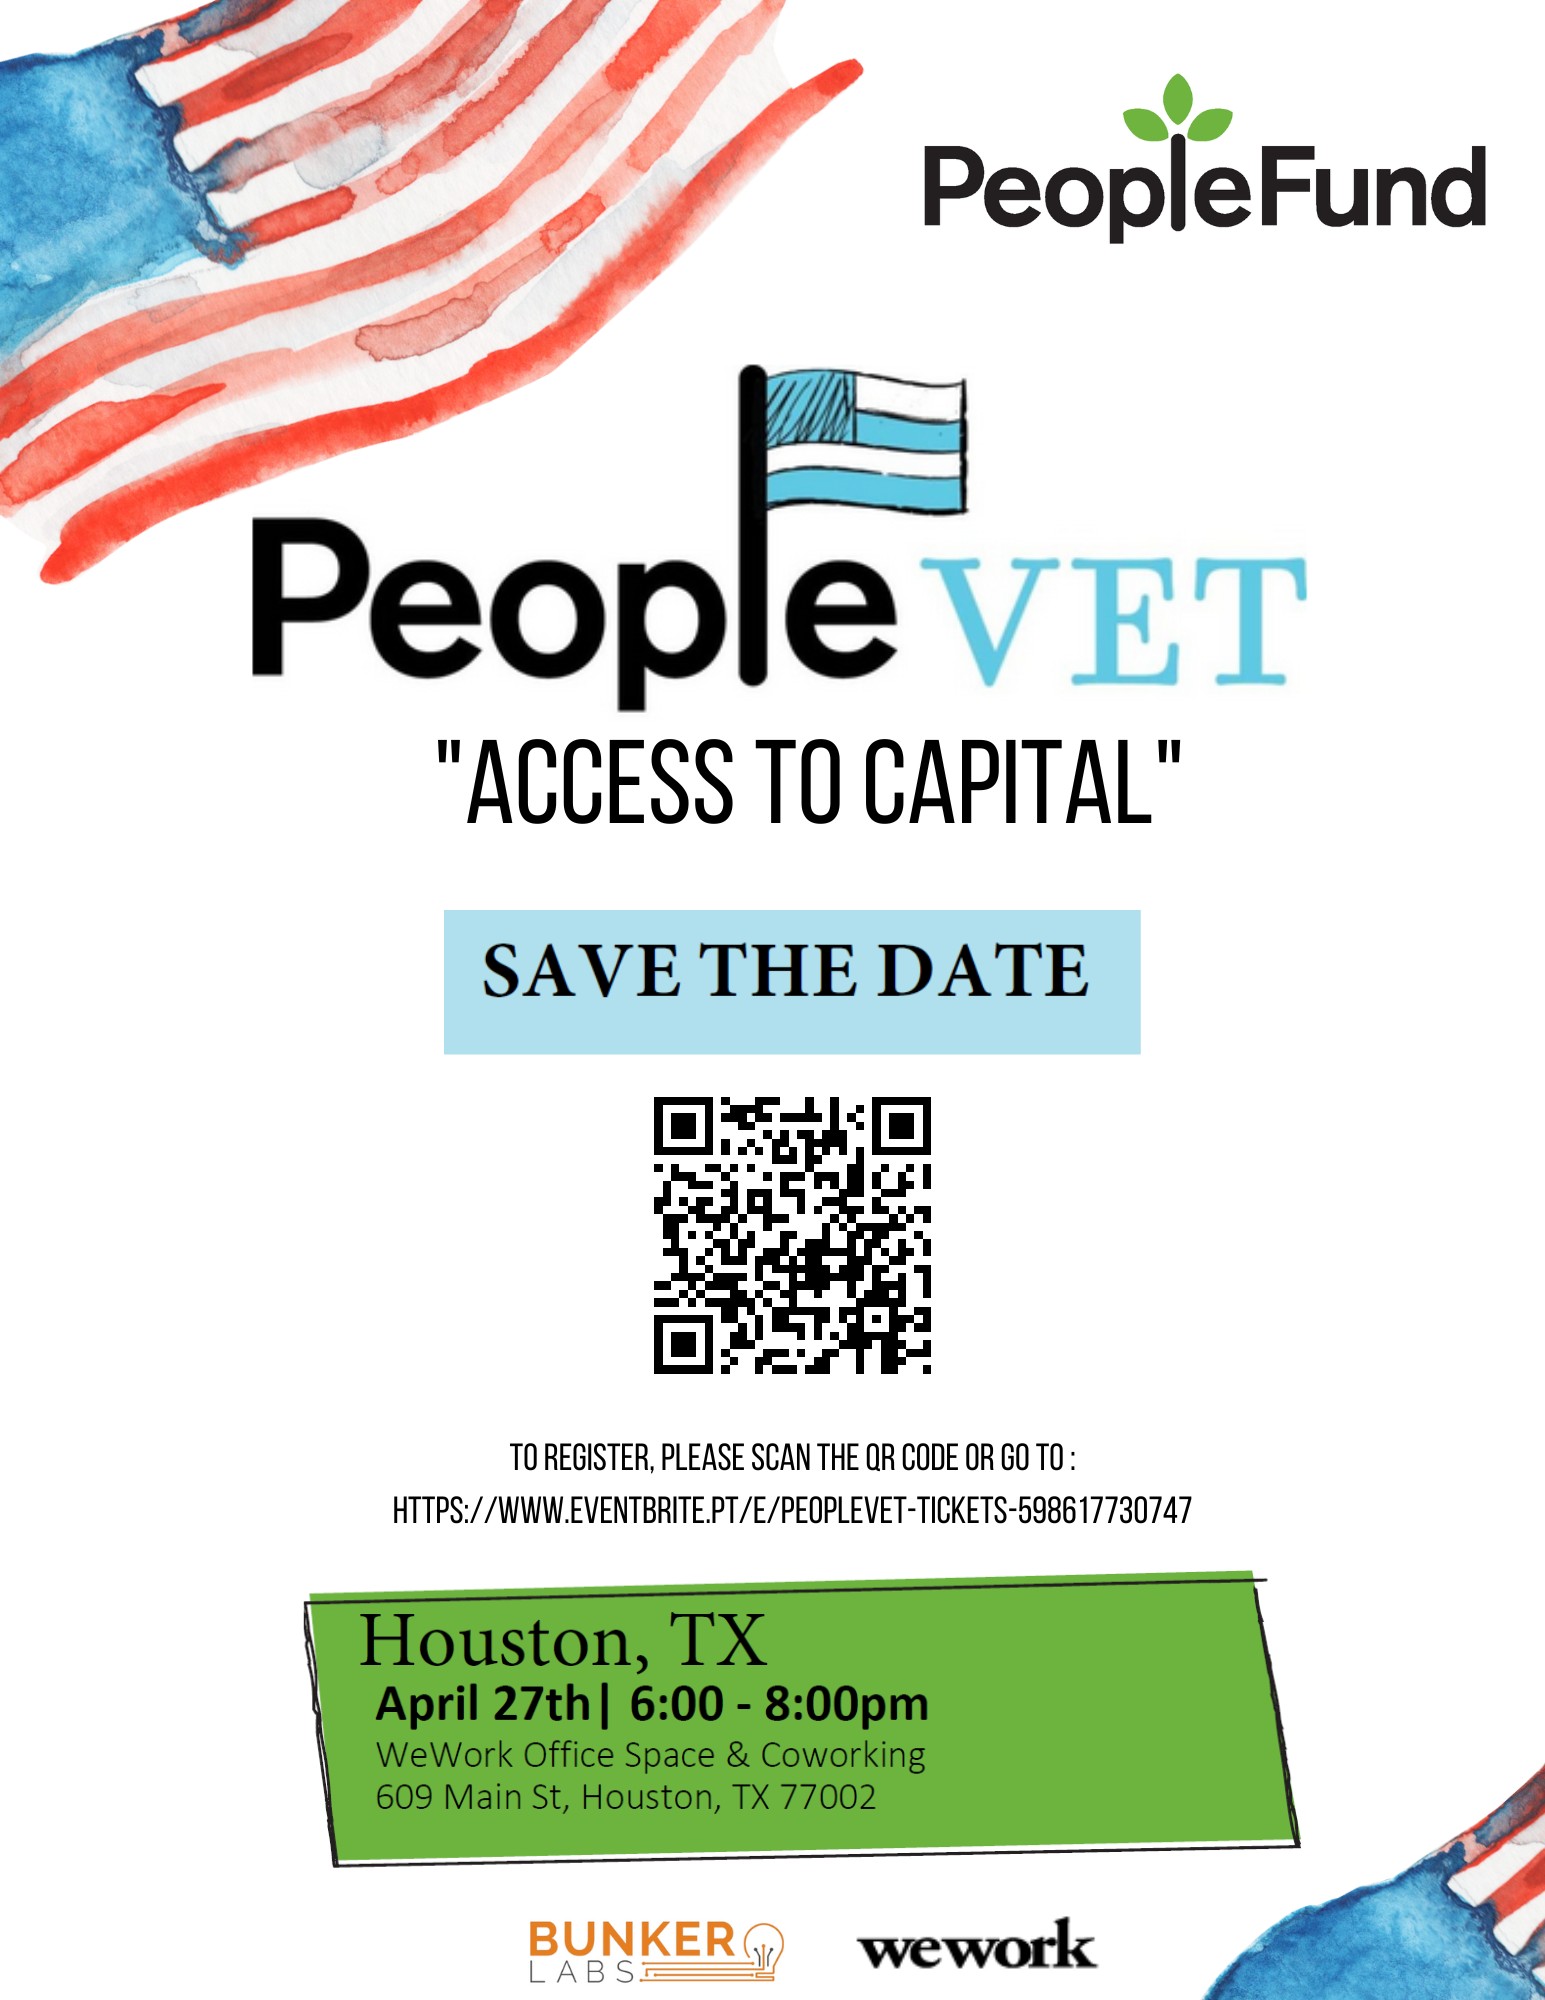 Access to Capital - People Vet flyer